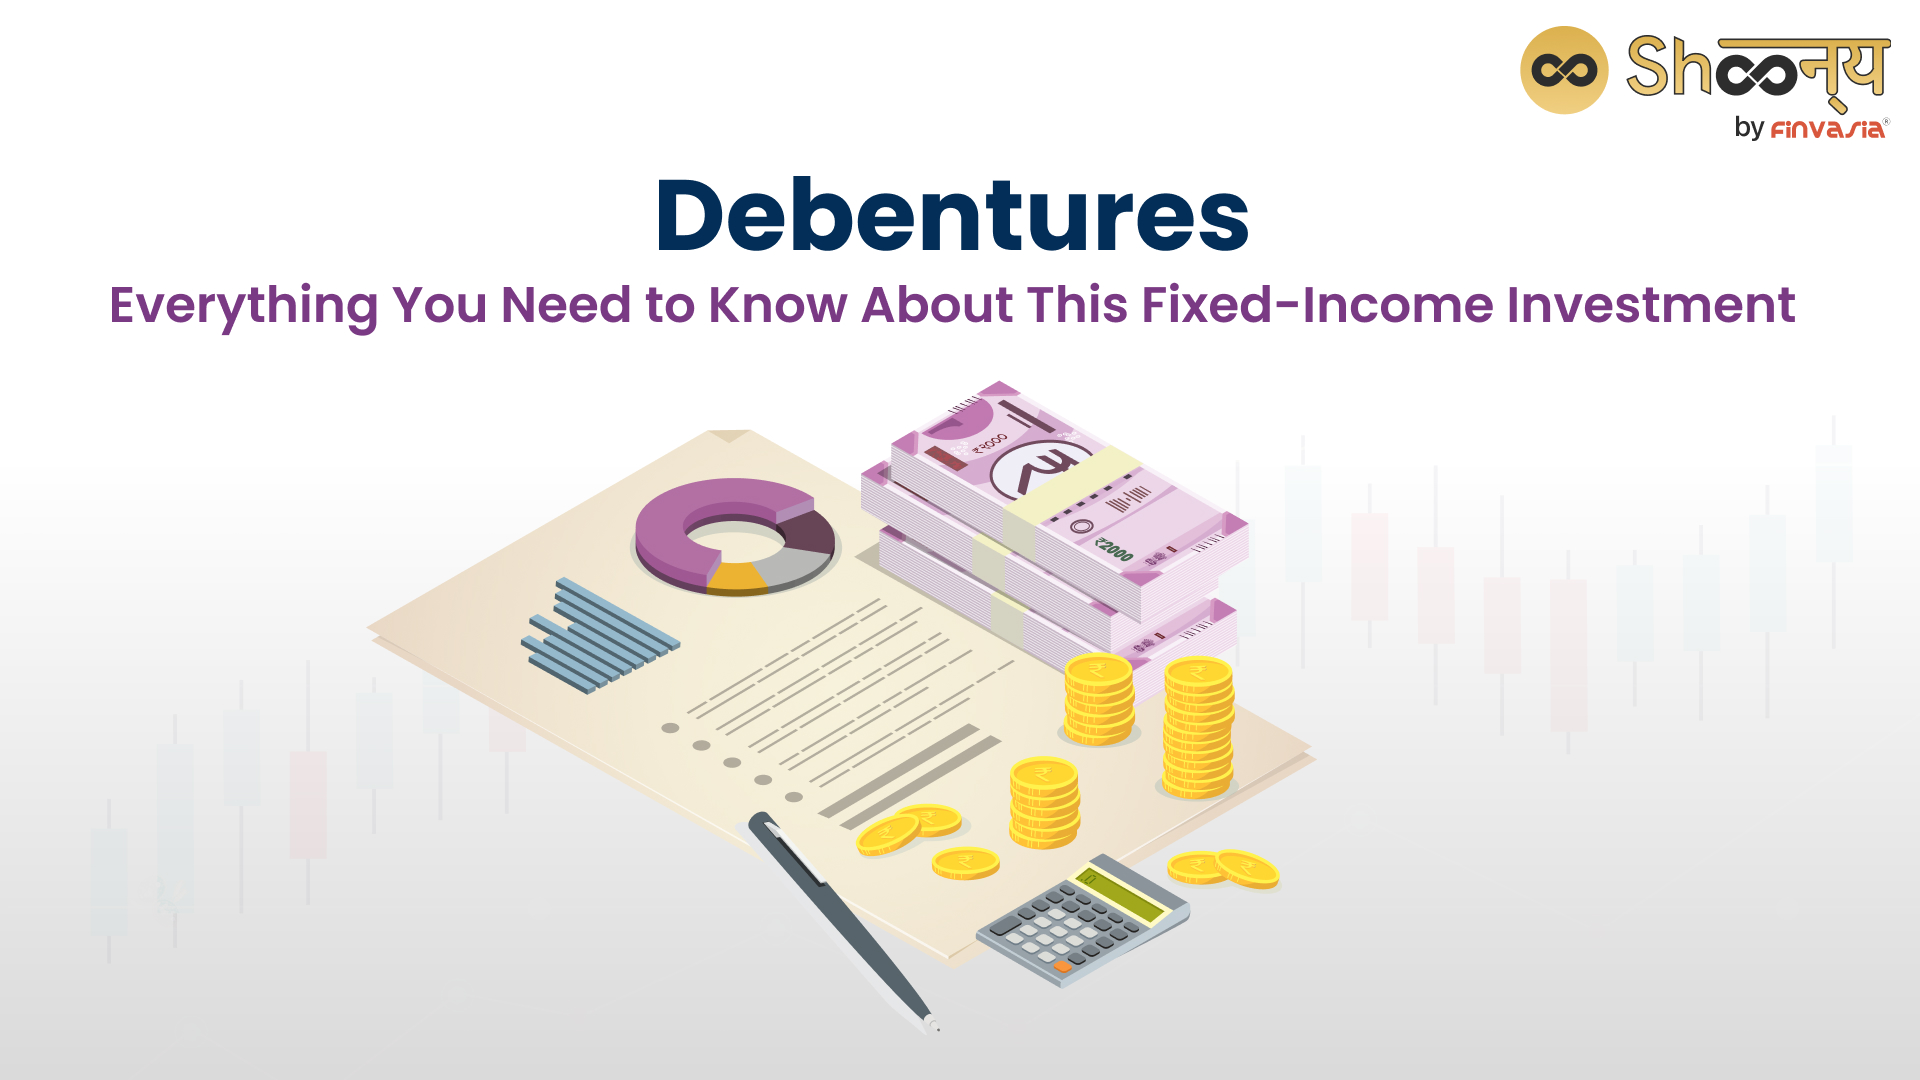 Debentures: Everything You Need to Know About This Fixed-Income Investment